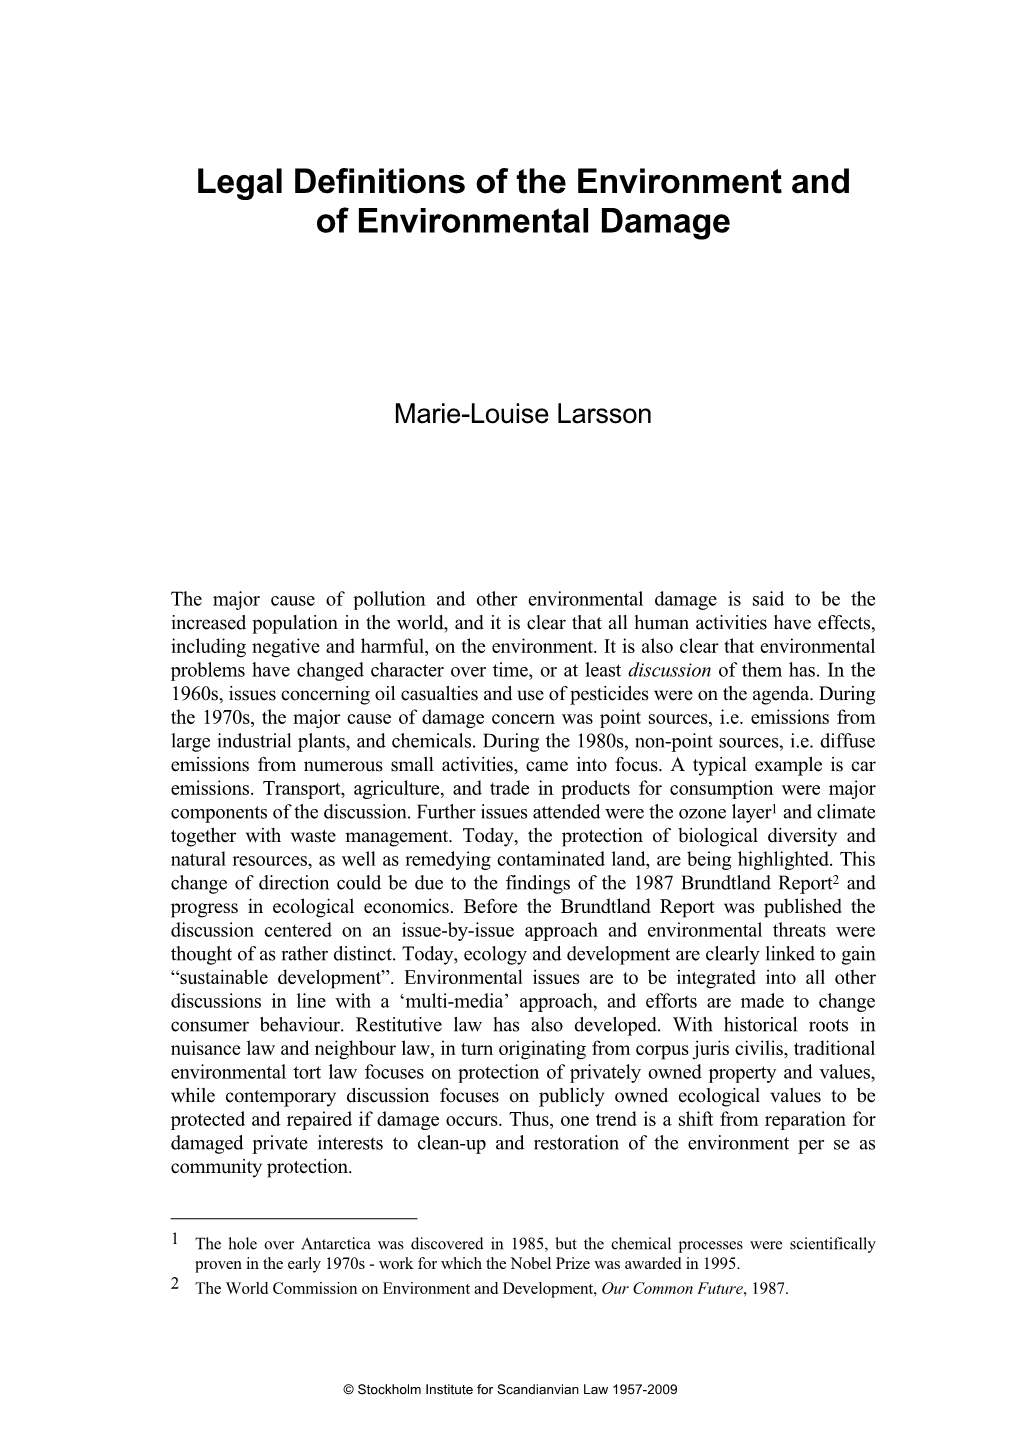 Legal Definitions of the Environment and of Environmental Damage